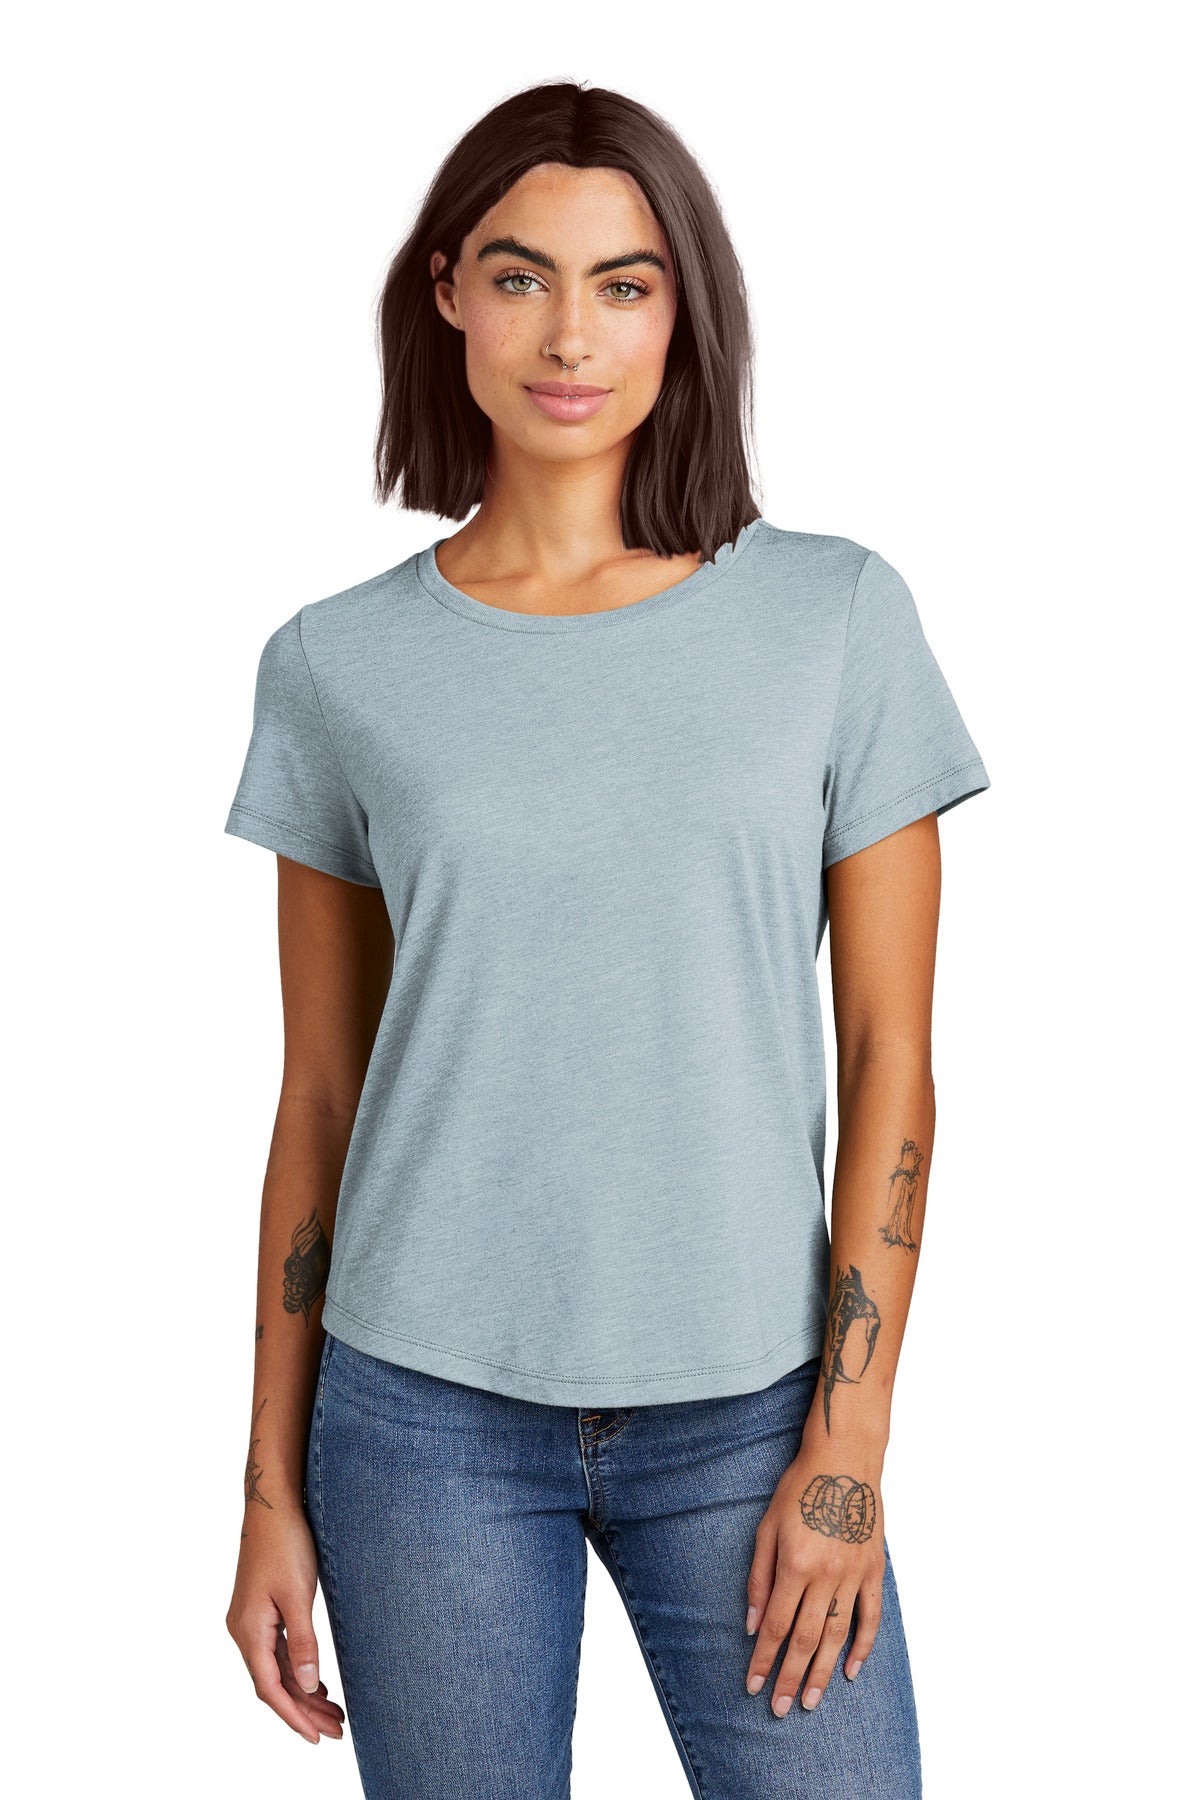 Allmade® Women's Relaxed Tri-Blend Scoop Neck Tee AL2015